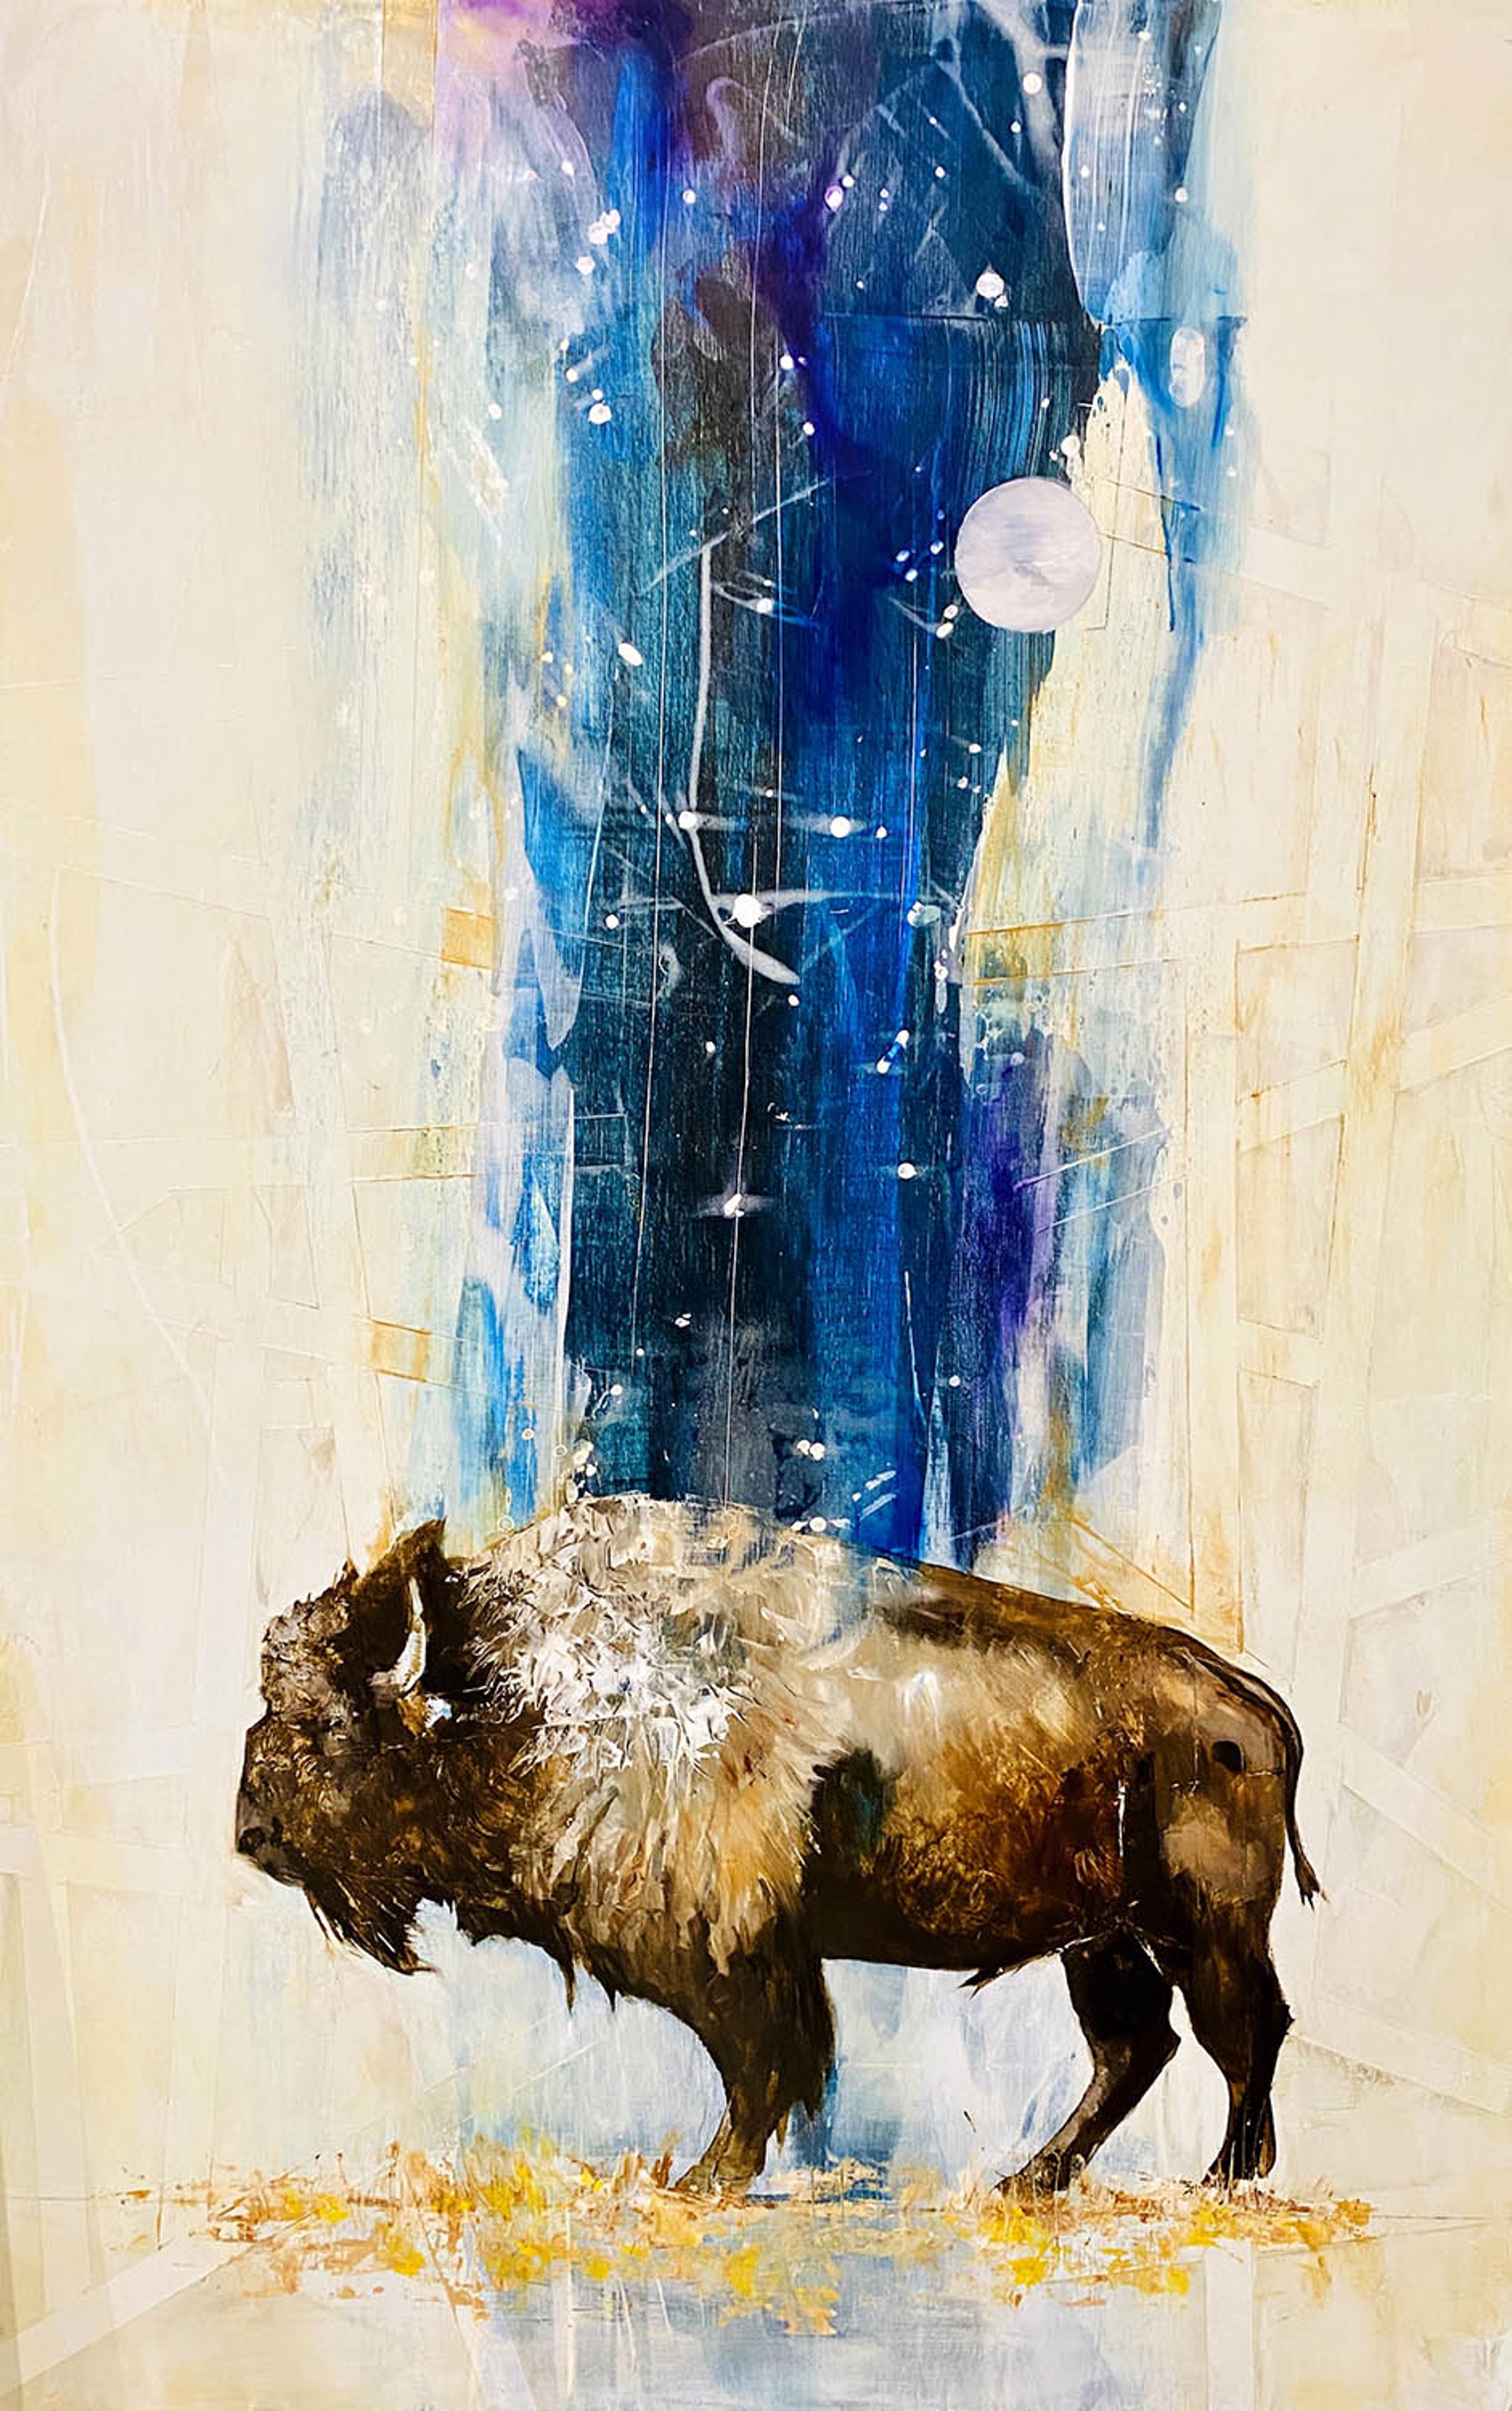 Original Oil Painting By Jenna Von Benedikt Featuring A Walking Bison Over Abstracted Background With Blue Gradient Stripe Running Vertically Through The Center And Transitioning To Yellow Tones